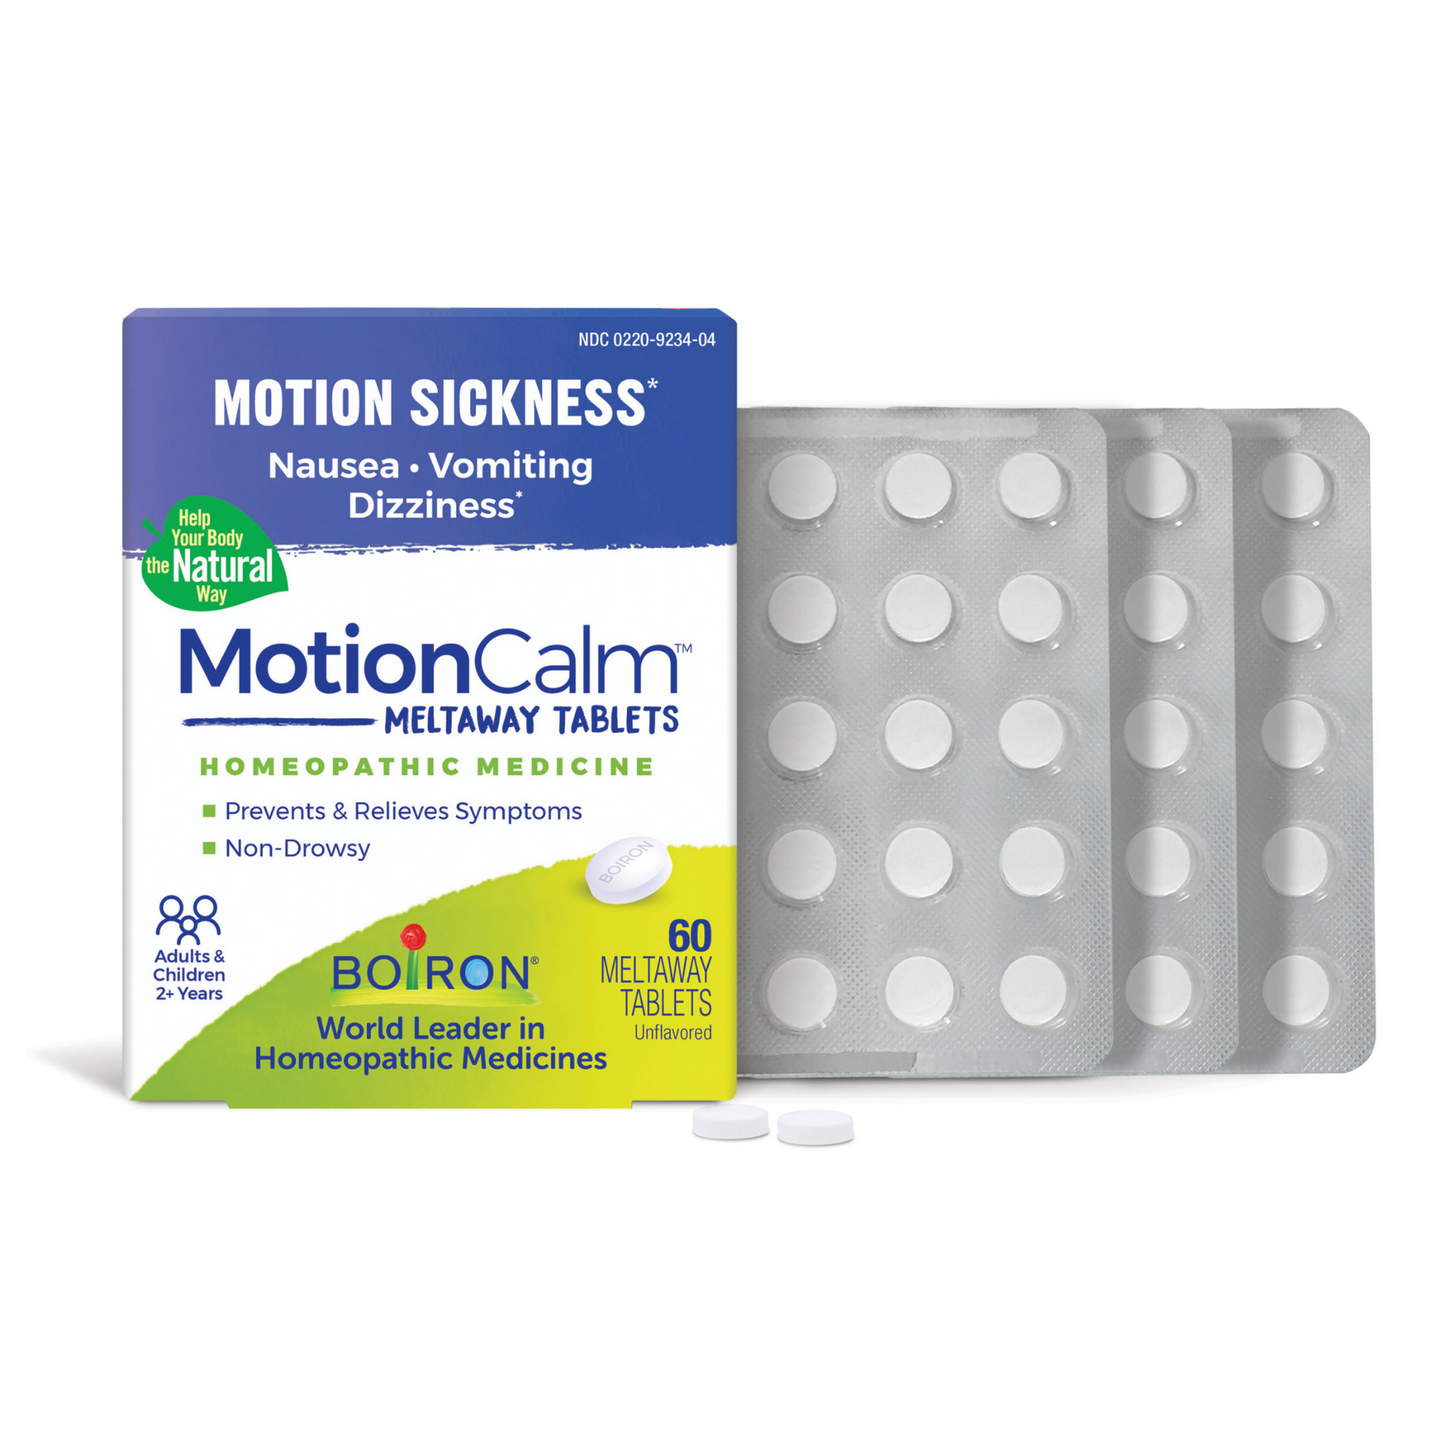 Boiron MotionCalm Meltaway Tablets (60 count) #10084682